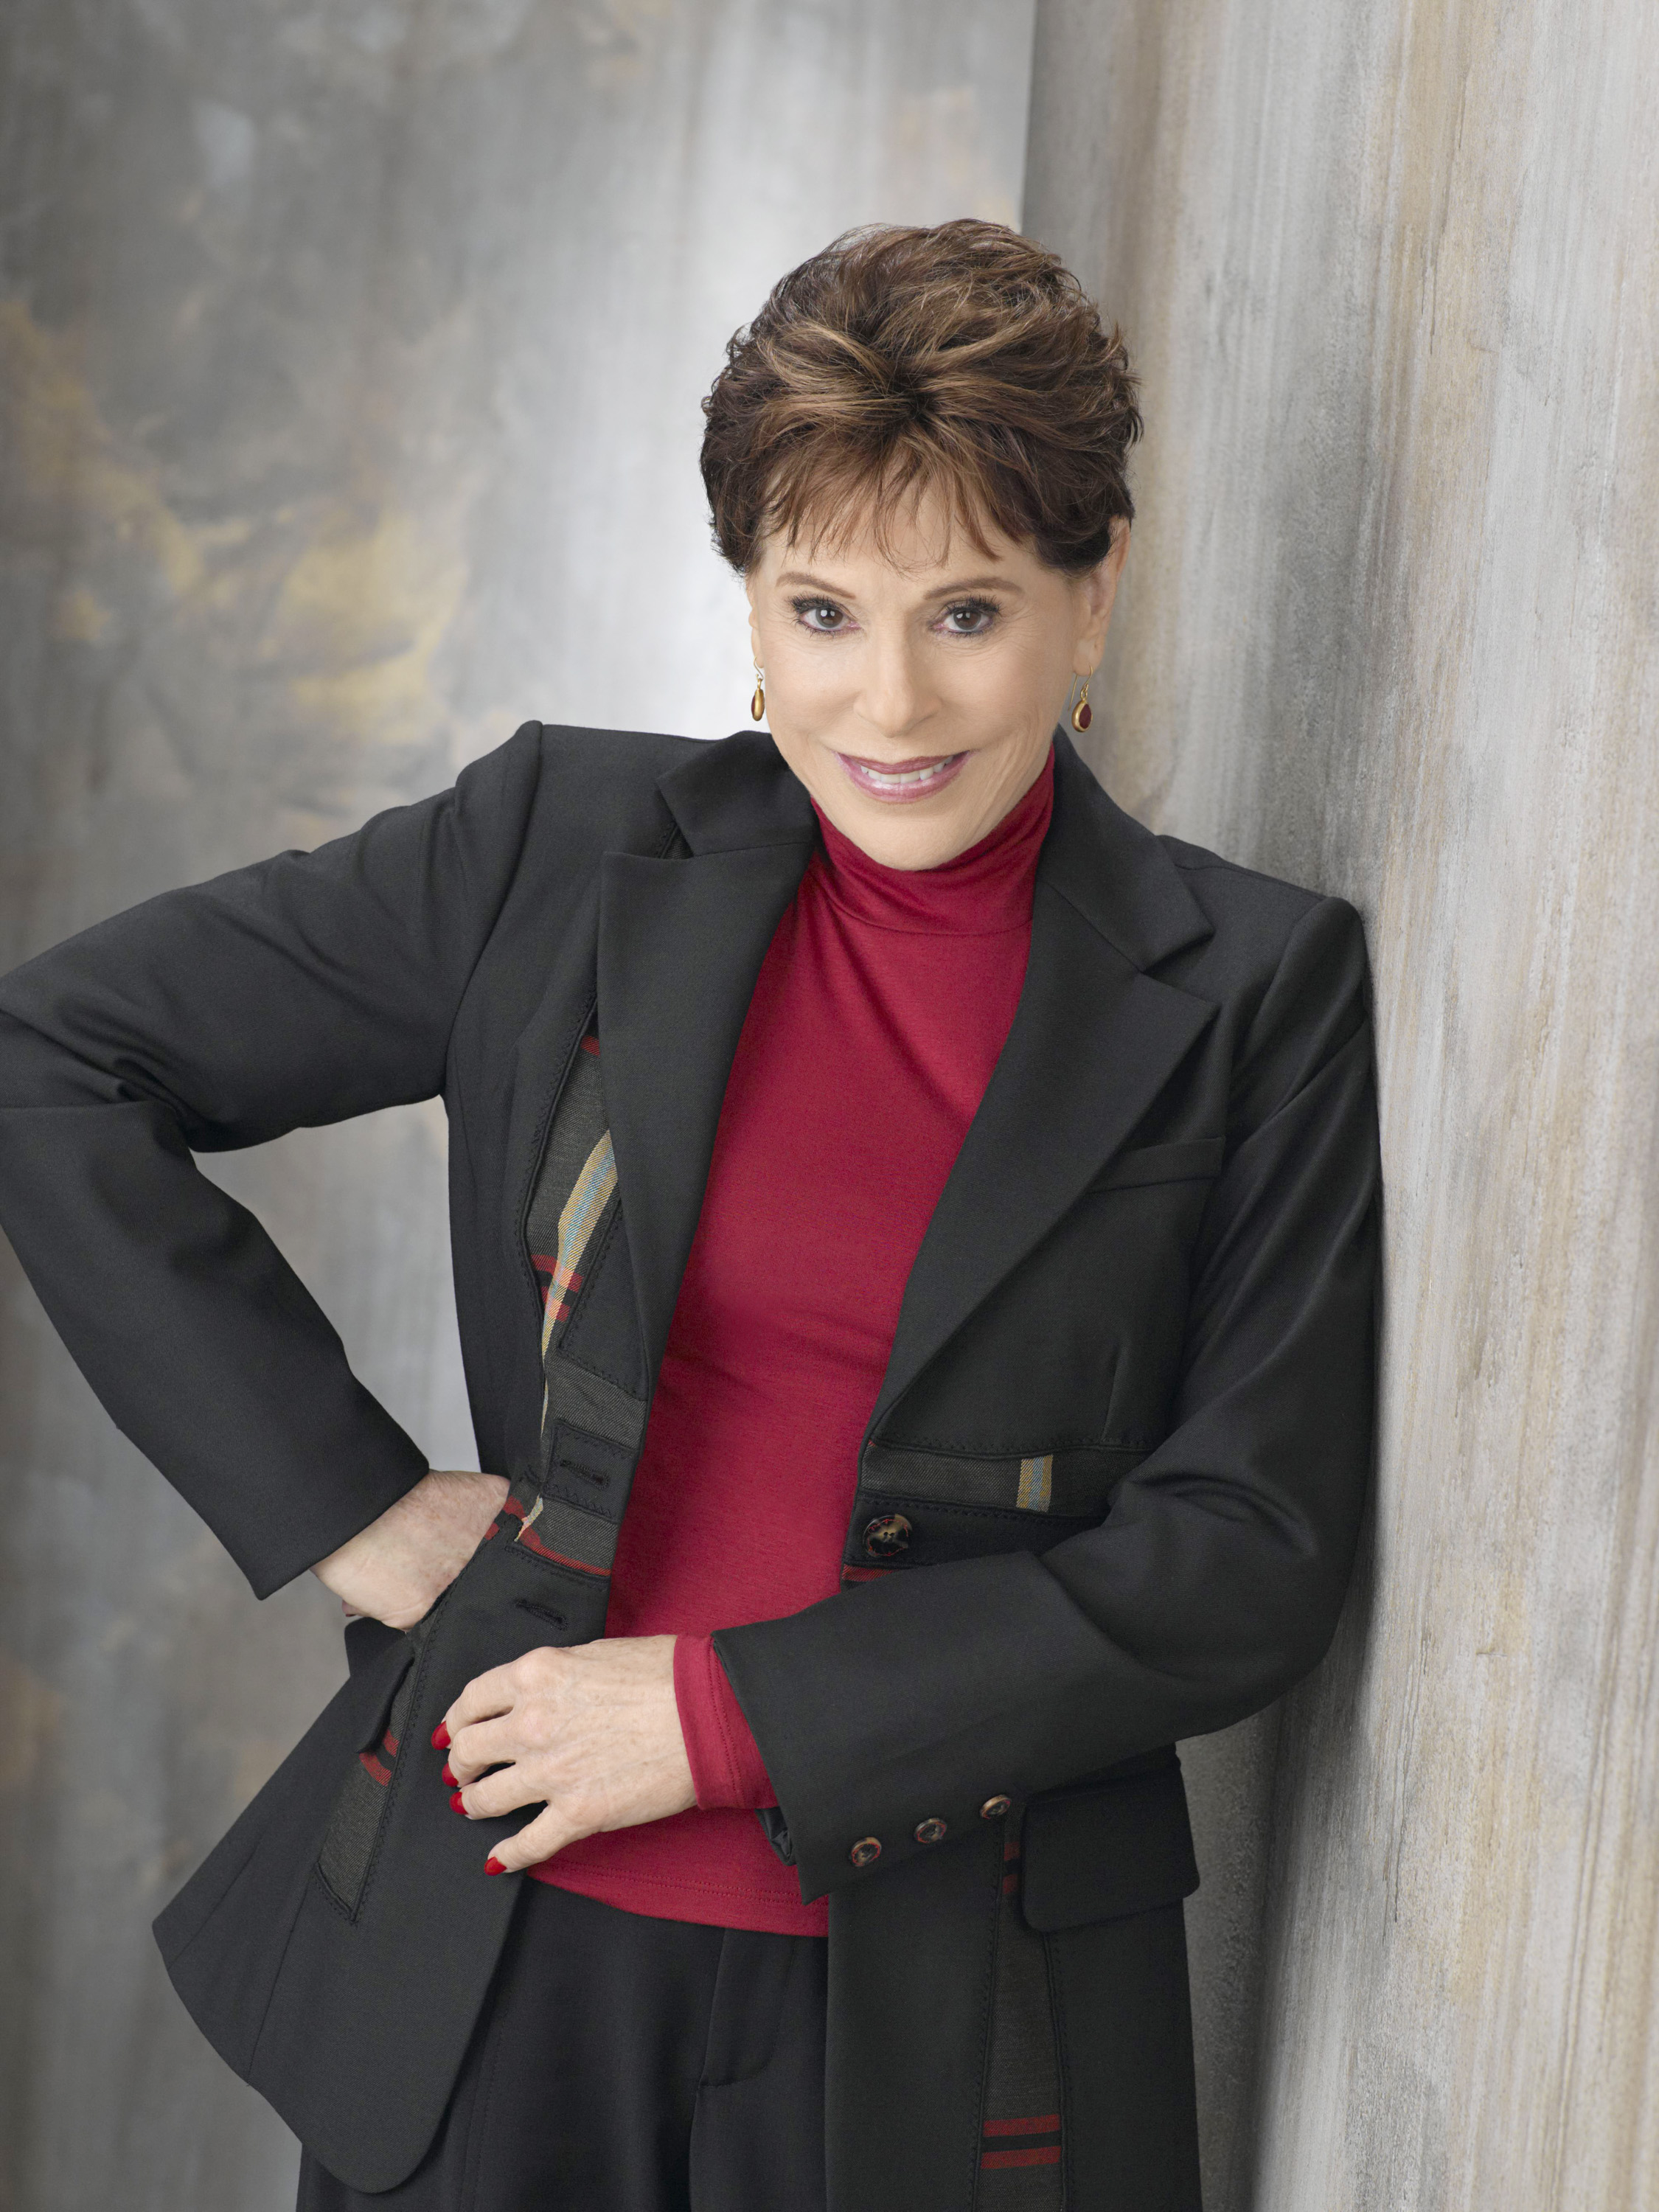 Louise Sorel as Vivian Alamain on "Days of Our Lives" on December 8, 2010. | Source: Getty Imgaes